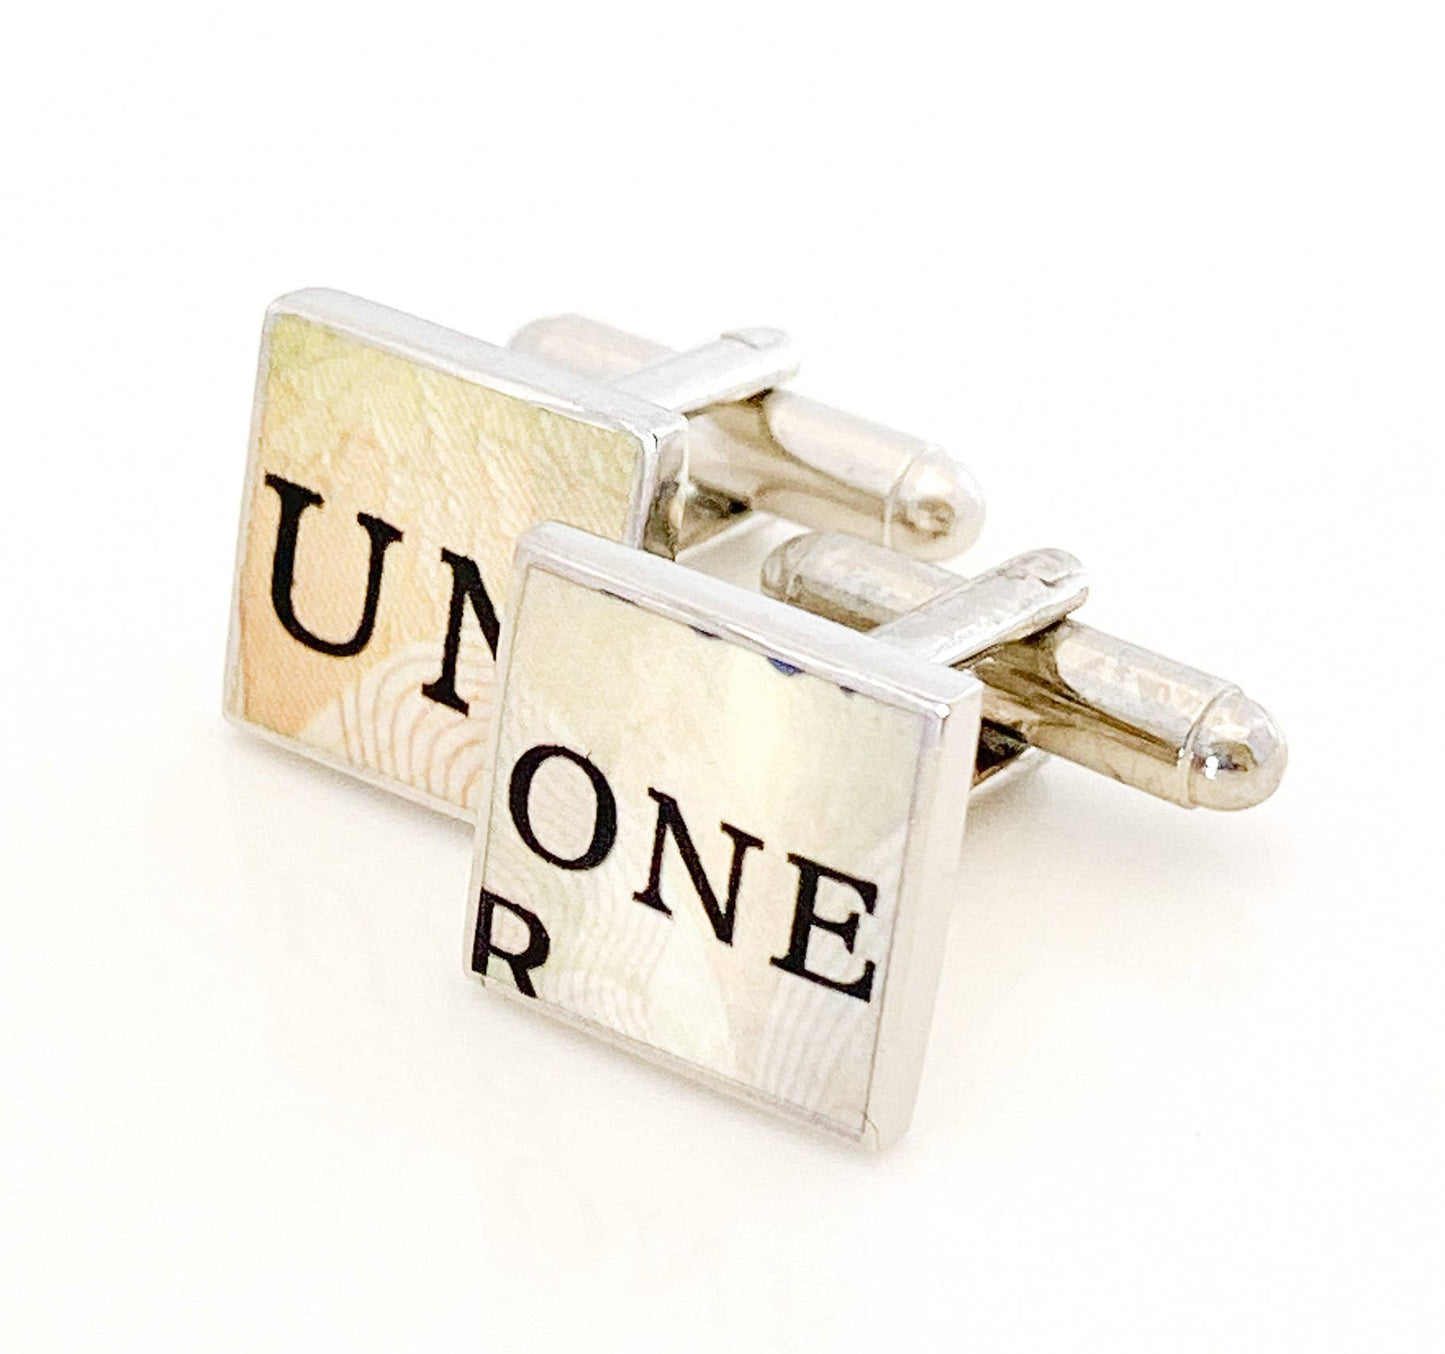 Square cufflinks with UN and ONE from Canadian dollar bill